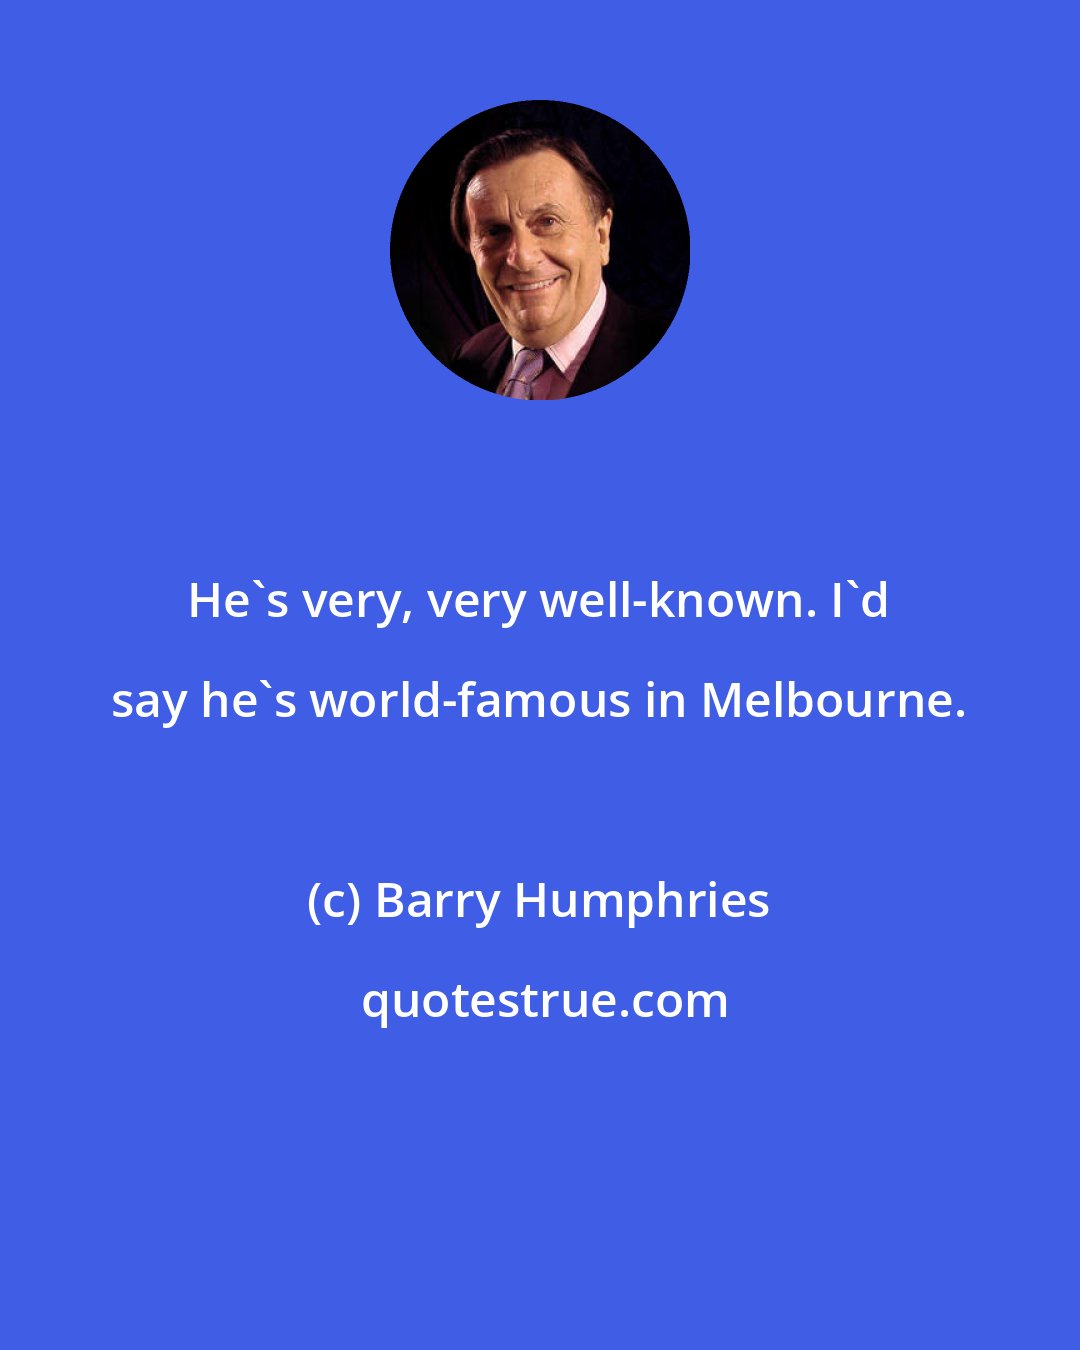 Barry Humphries: He's very, very well-known. I'd say he's world-famous in Melbourne.